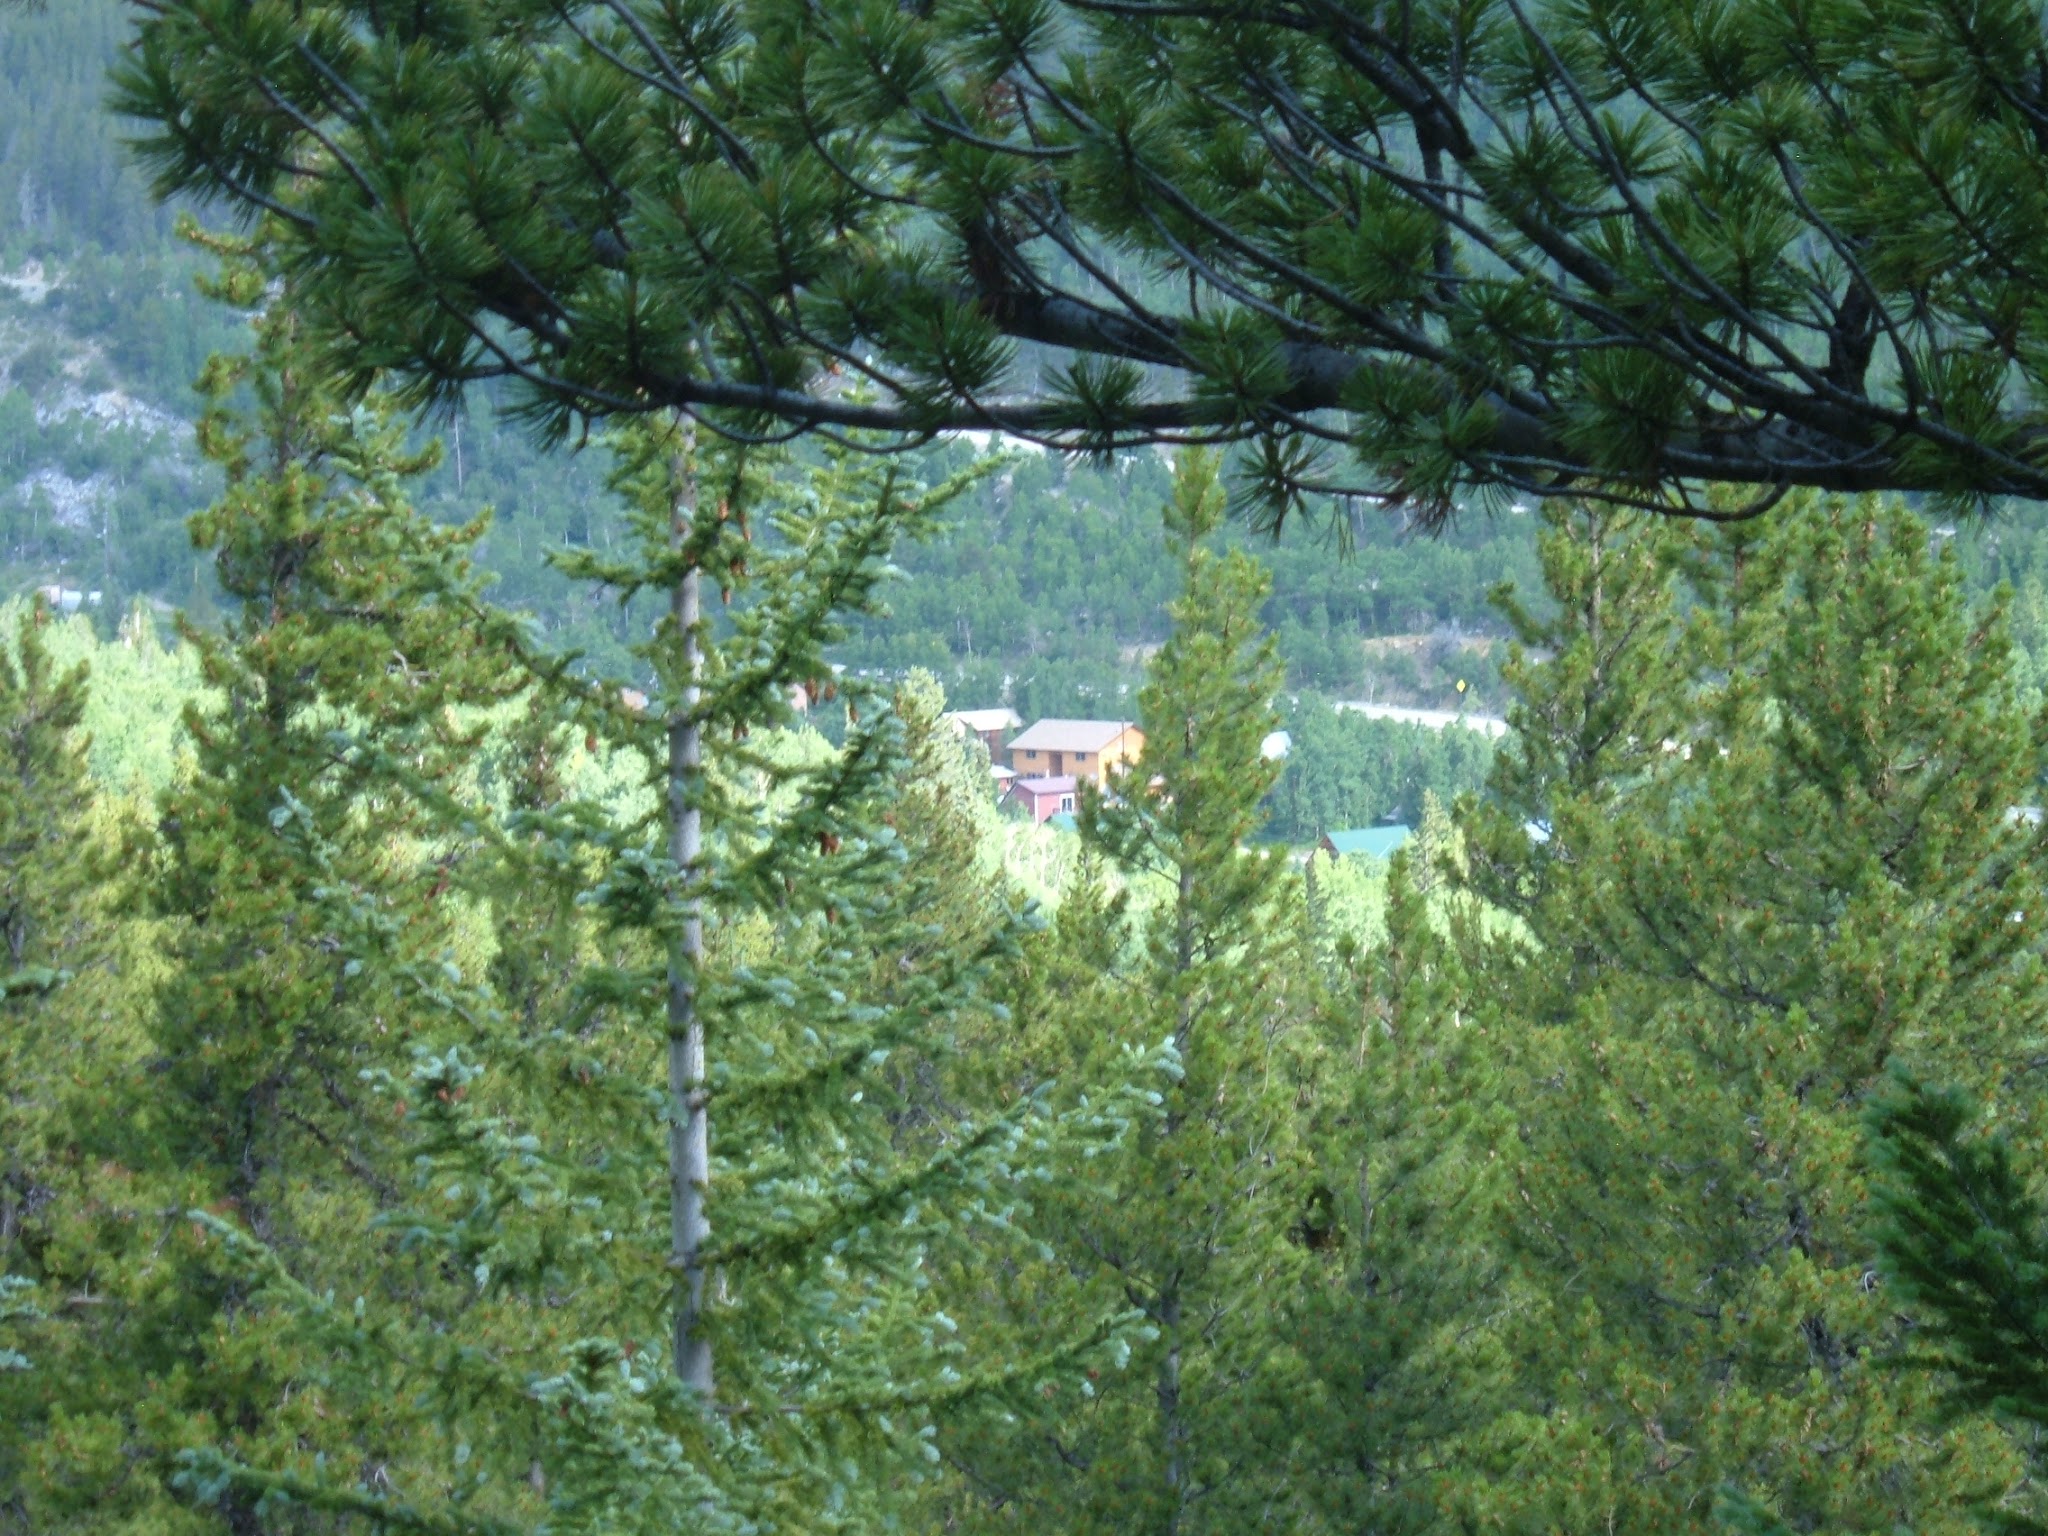 A distance view through the trees of Ski Town Condos from the mountain side.